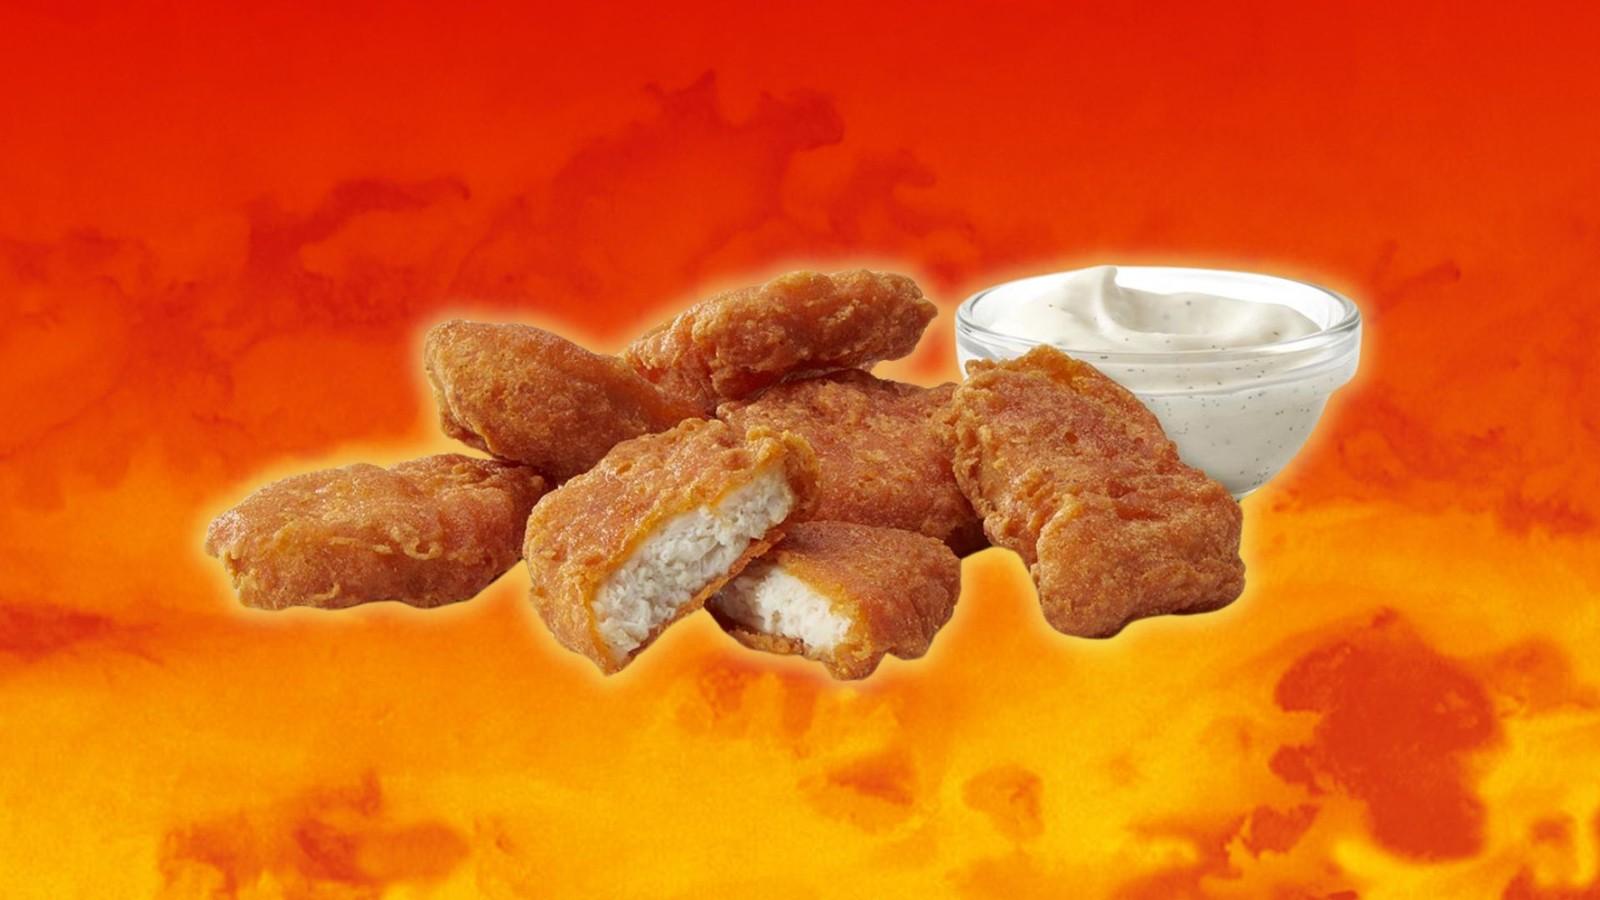 McDonald's spicy McNuggets on a fiery background.